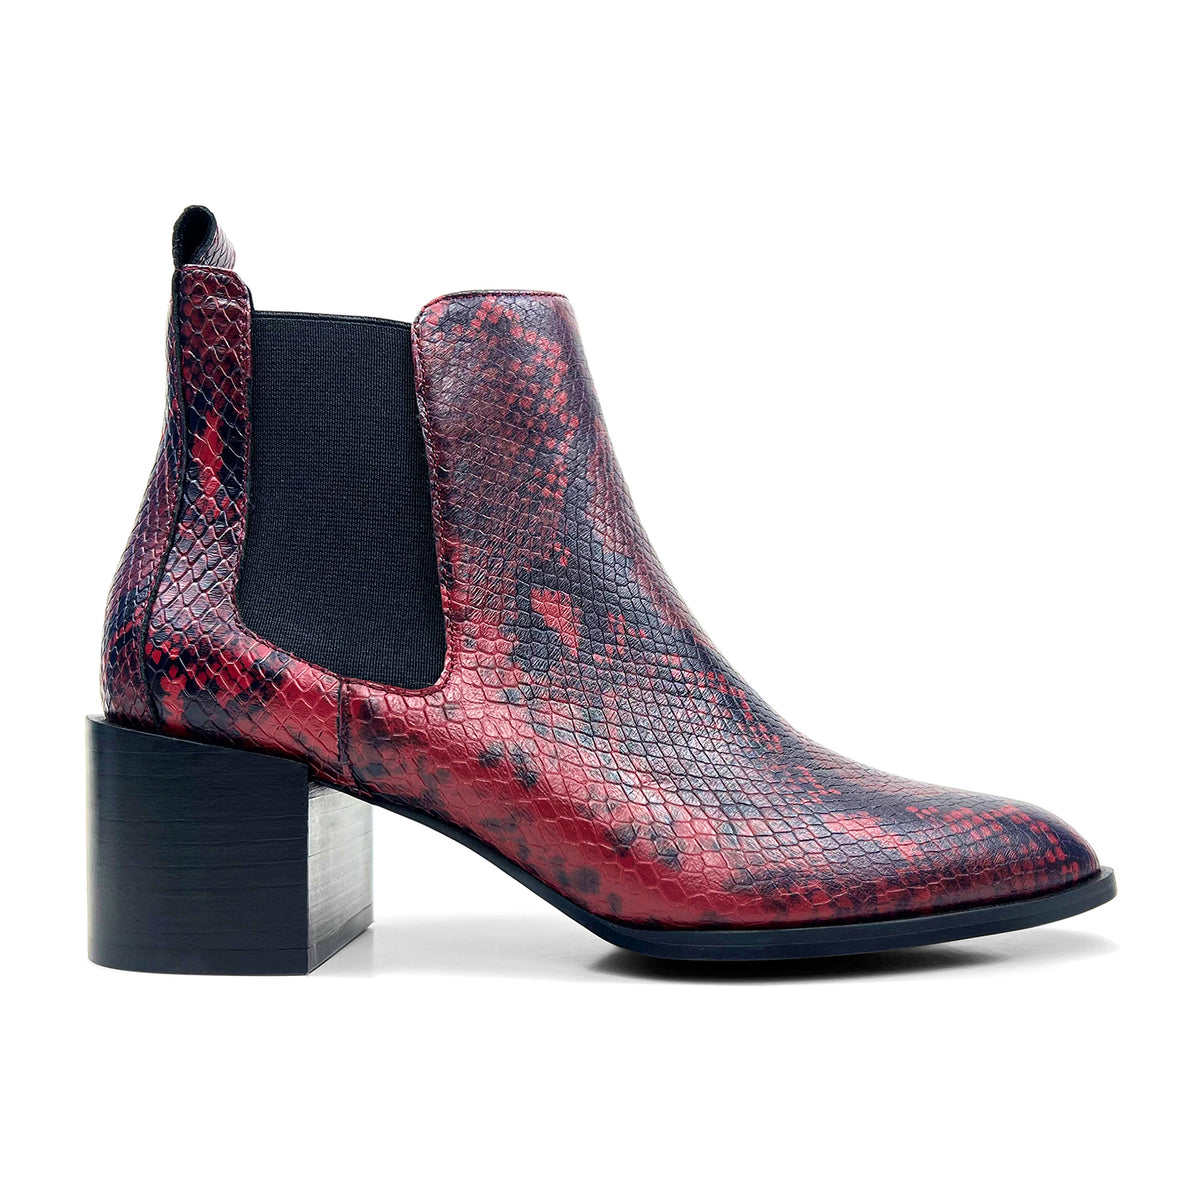 Melissa Chelsea Boot in Red Snake Leather